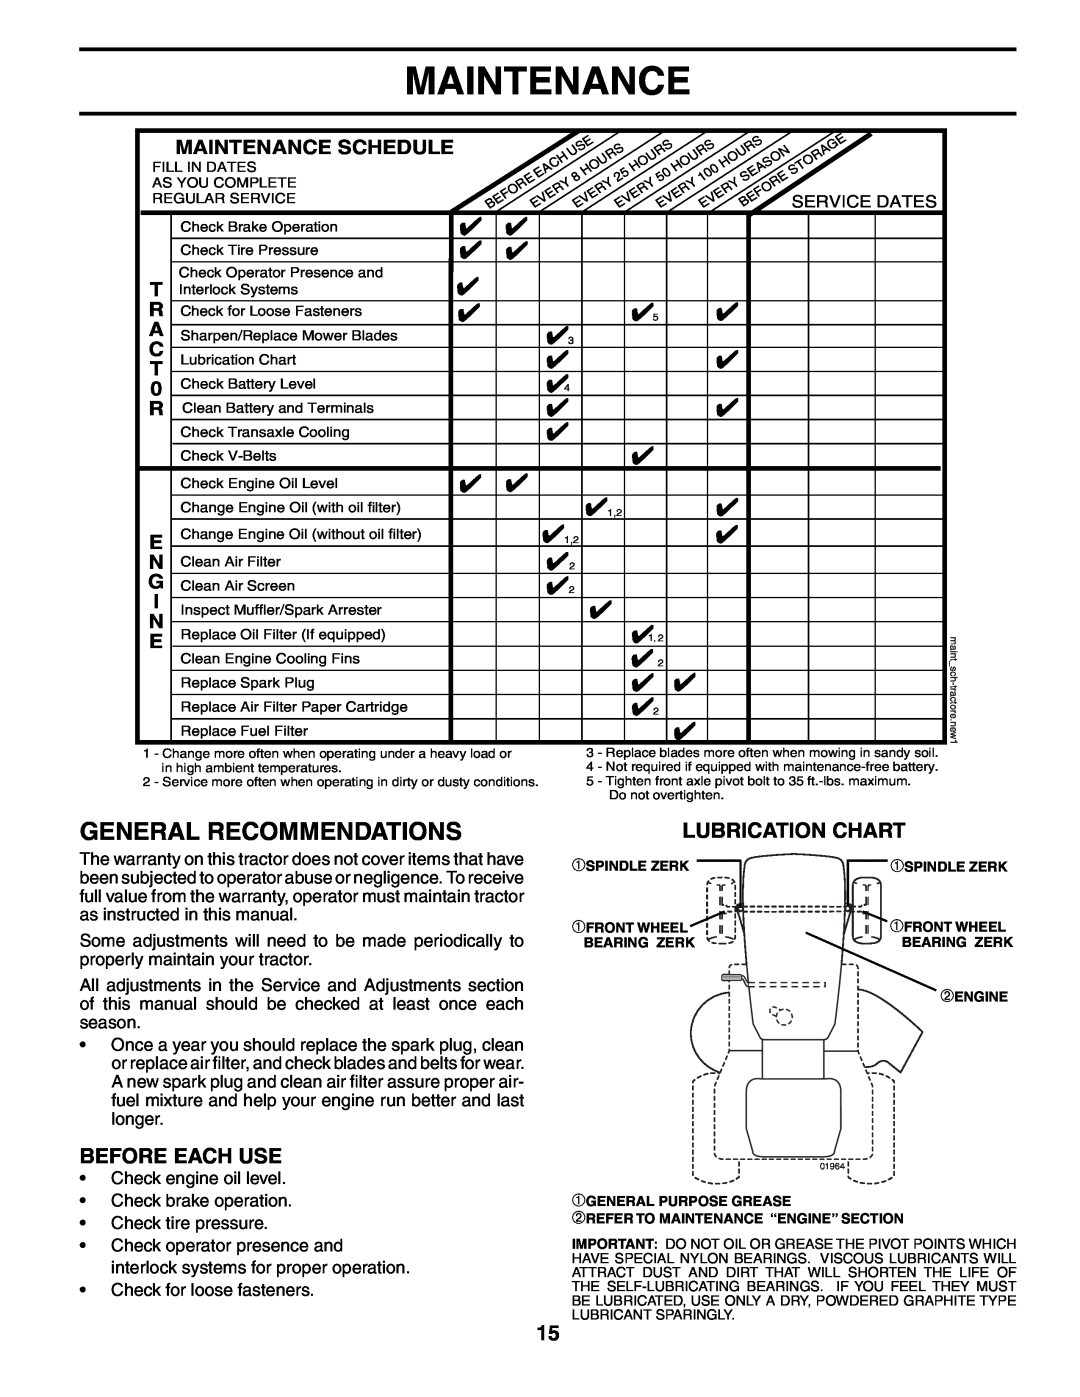 Poulan PO17H42STB manual General Recommendations, Before Each Use, Lubrication Chart, Maintenance Schedule 